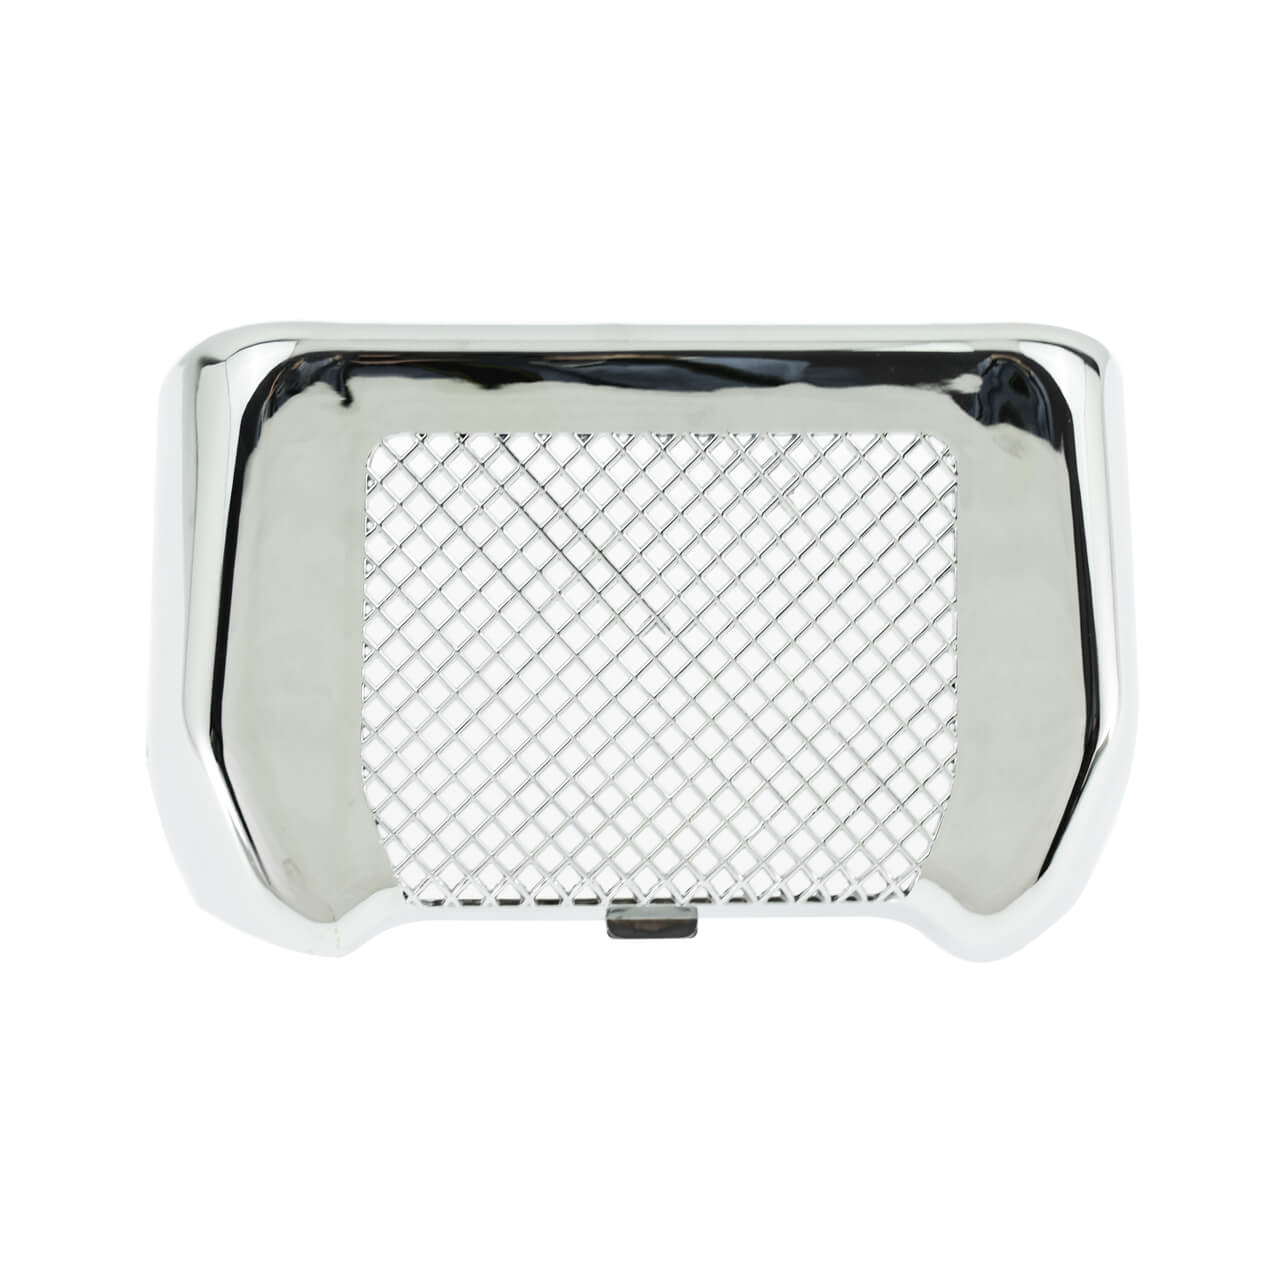 CR01150-harley-Oil-Cooler-cover-for-motorcycle